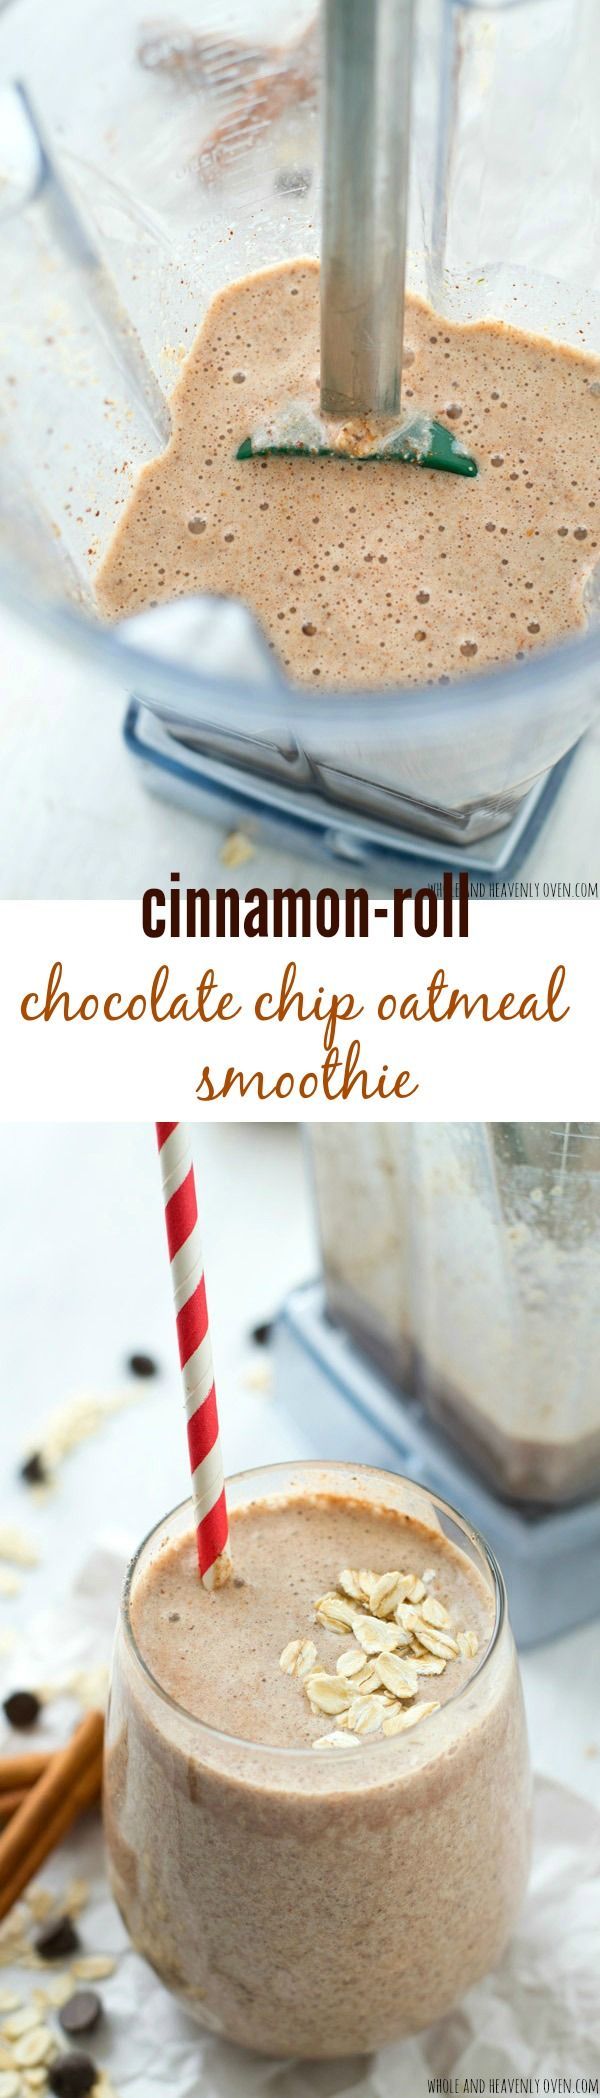 Super-creamy and loaded with a trio of cinnamon, chocolate, and oats, this filling breakfast smoothie is a sweet lighter breakfast